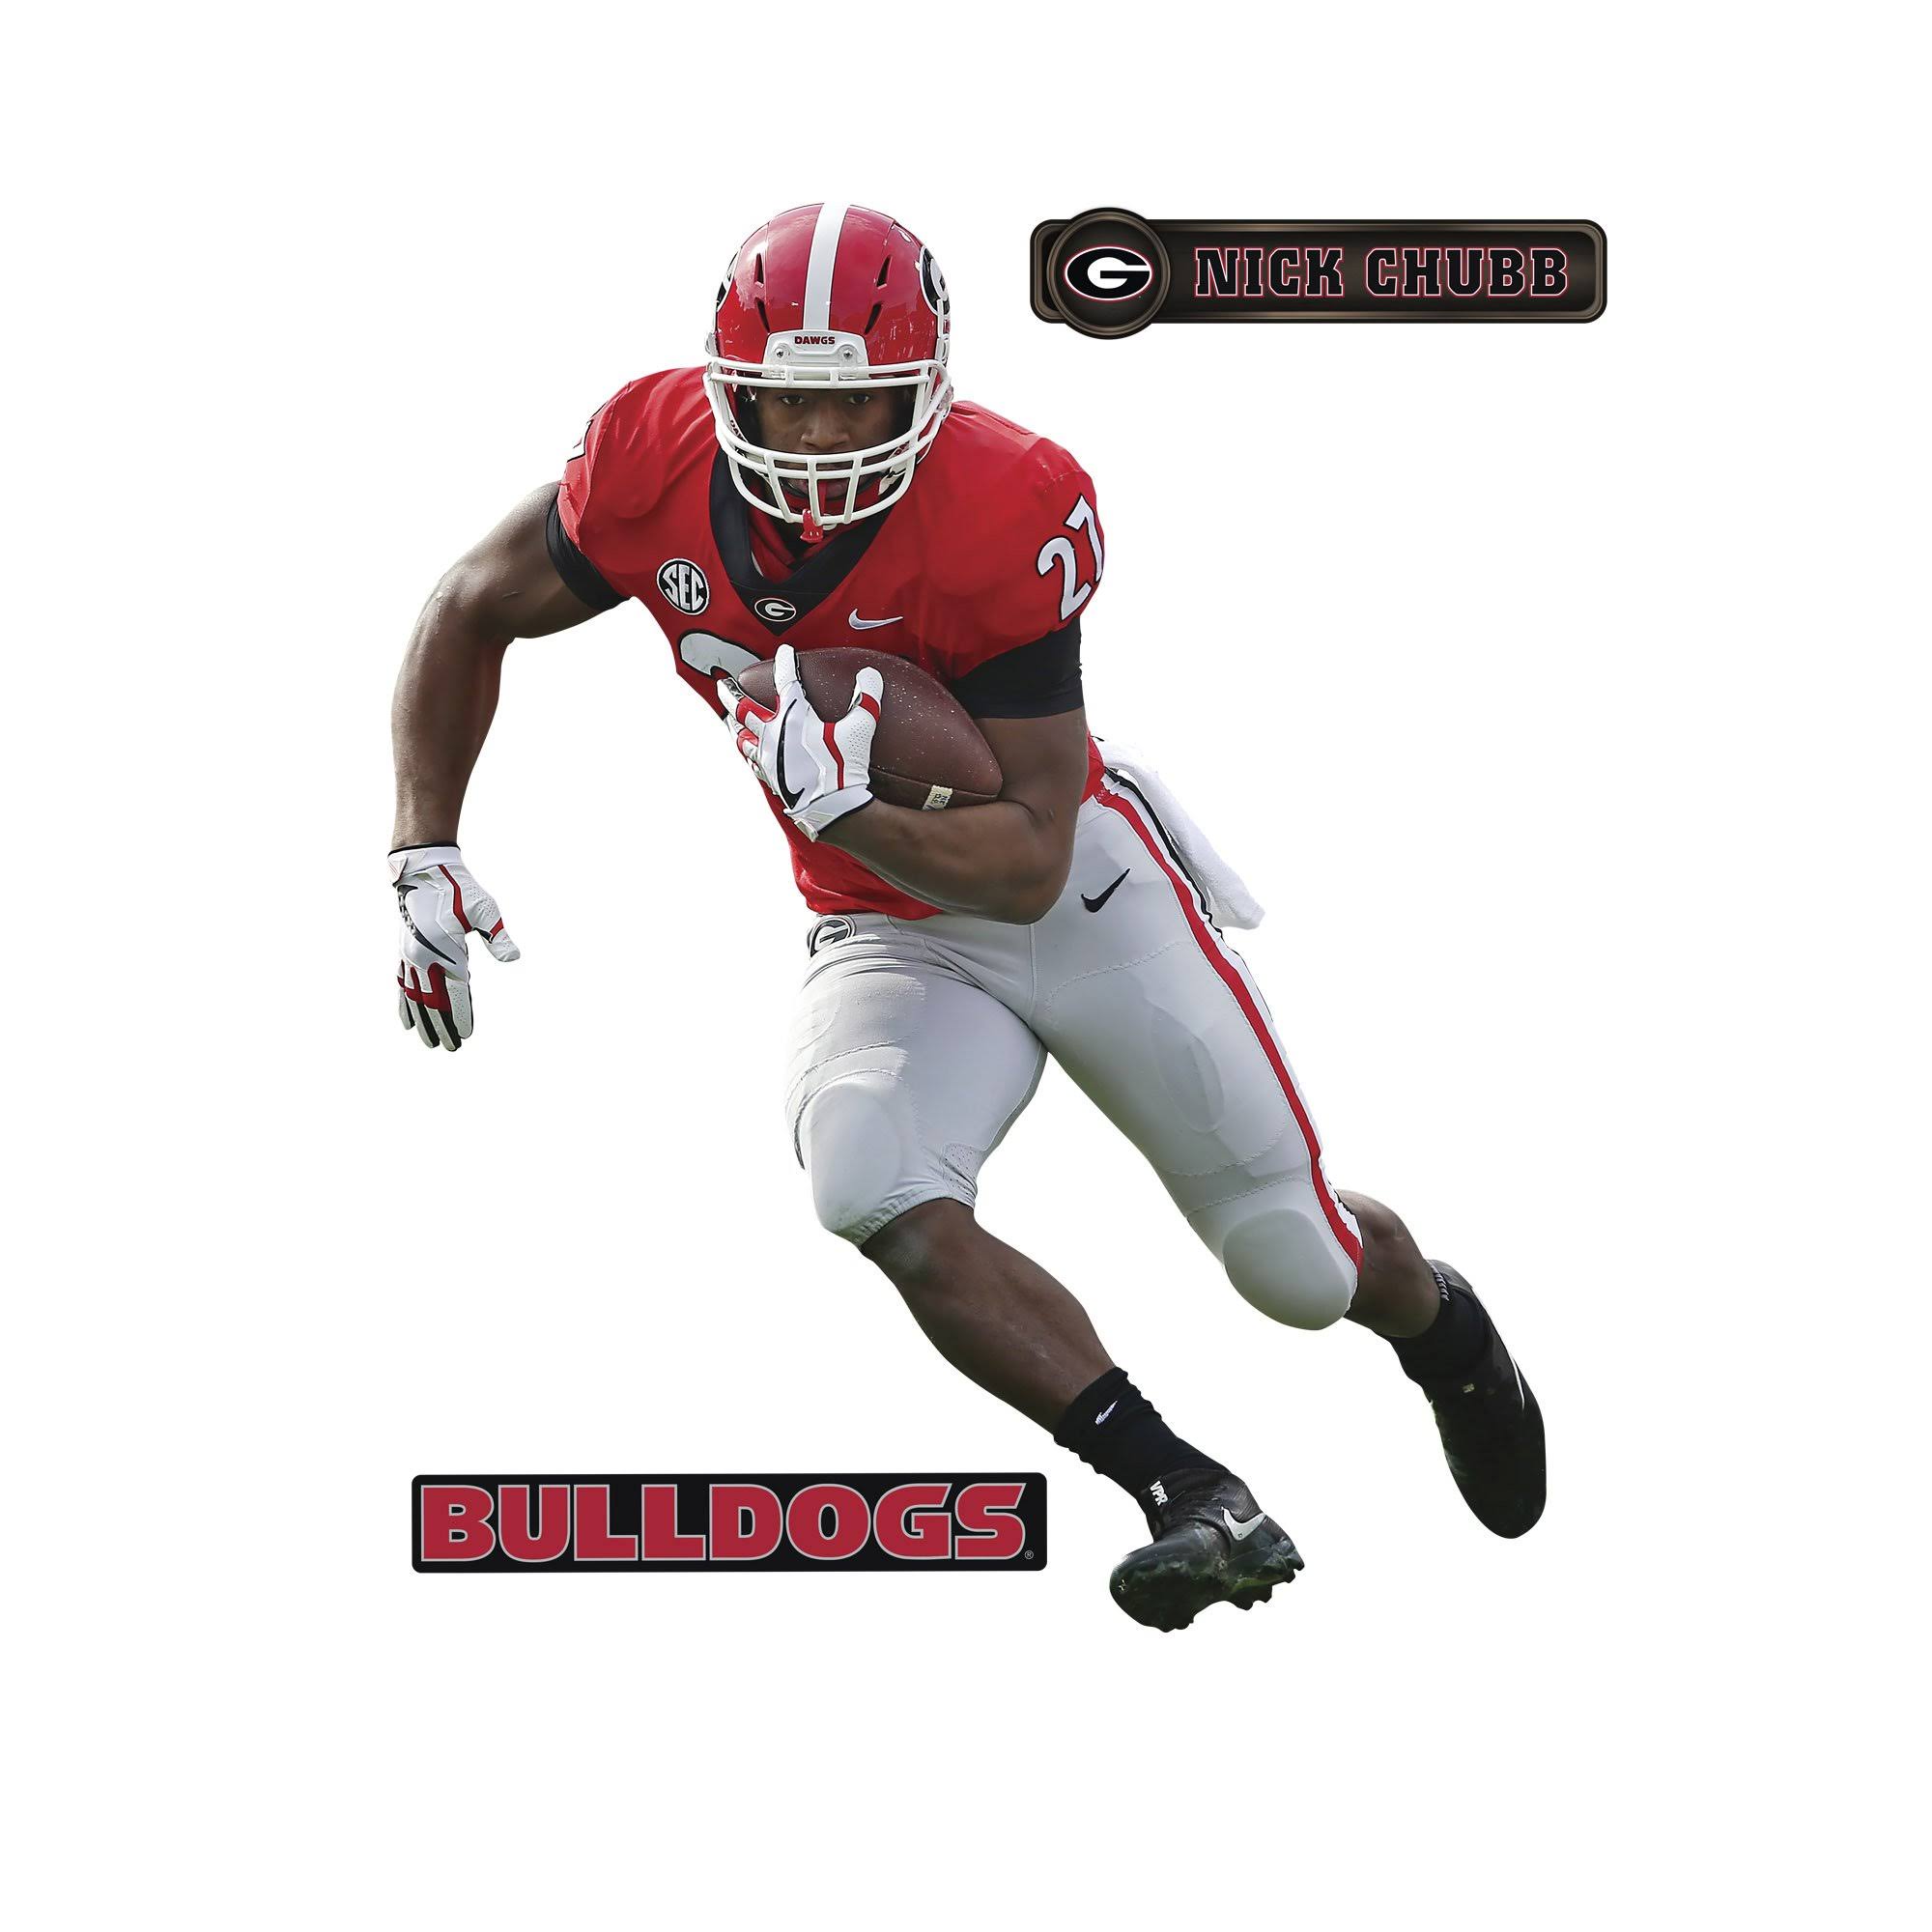 Fathead Nick Chubb Georgia Life Size Officially Licensed Removable Wall Decal 